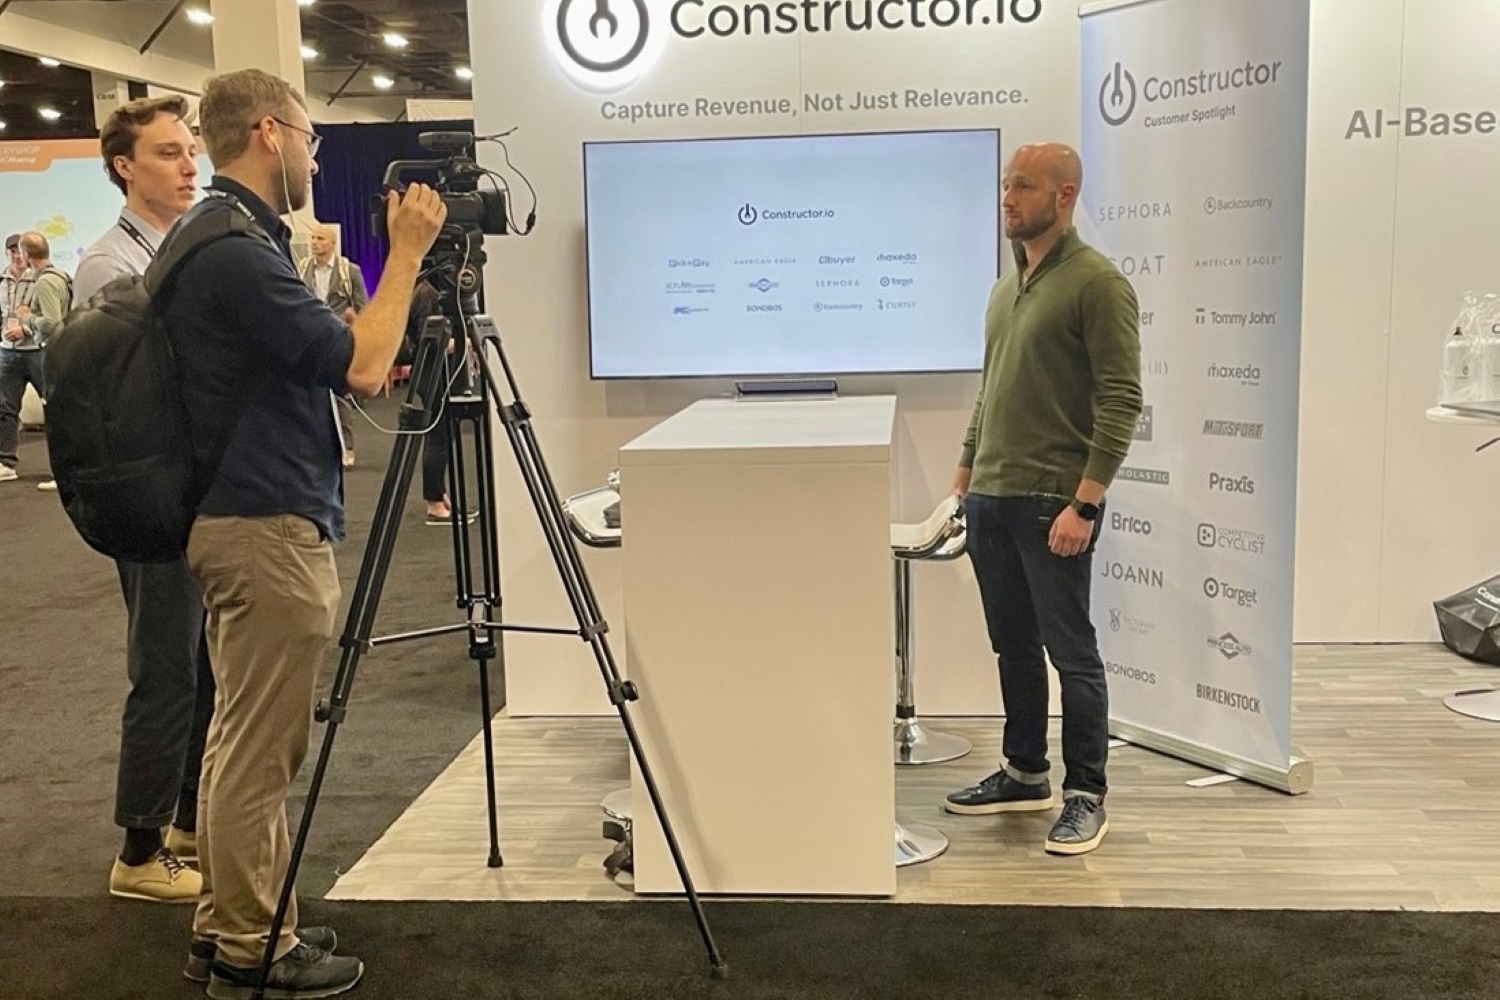 Constructor.io is in a video recording session